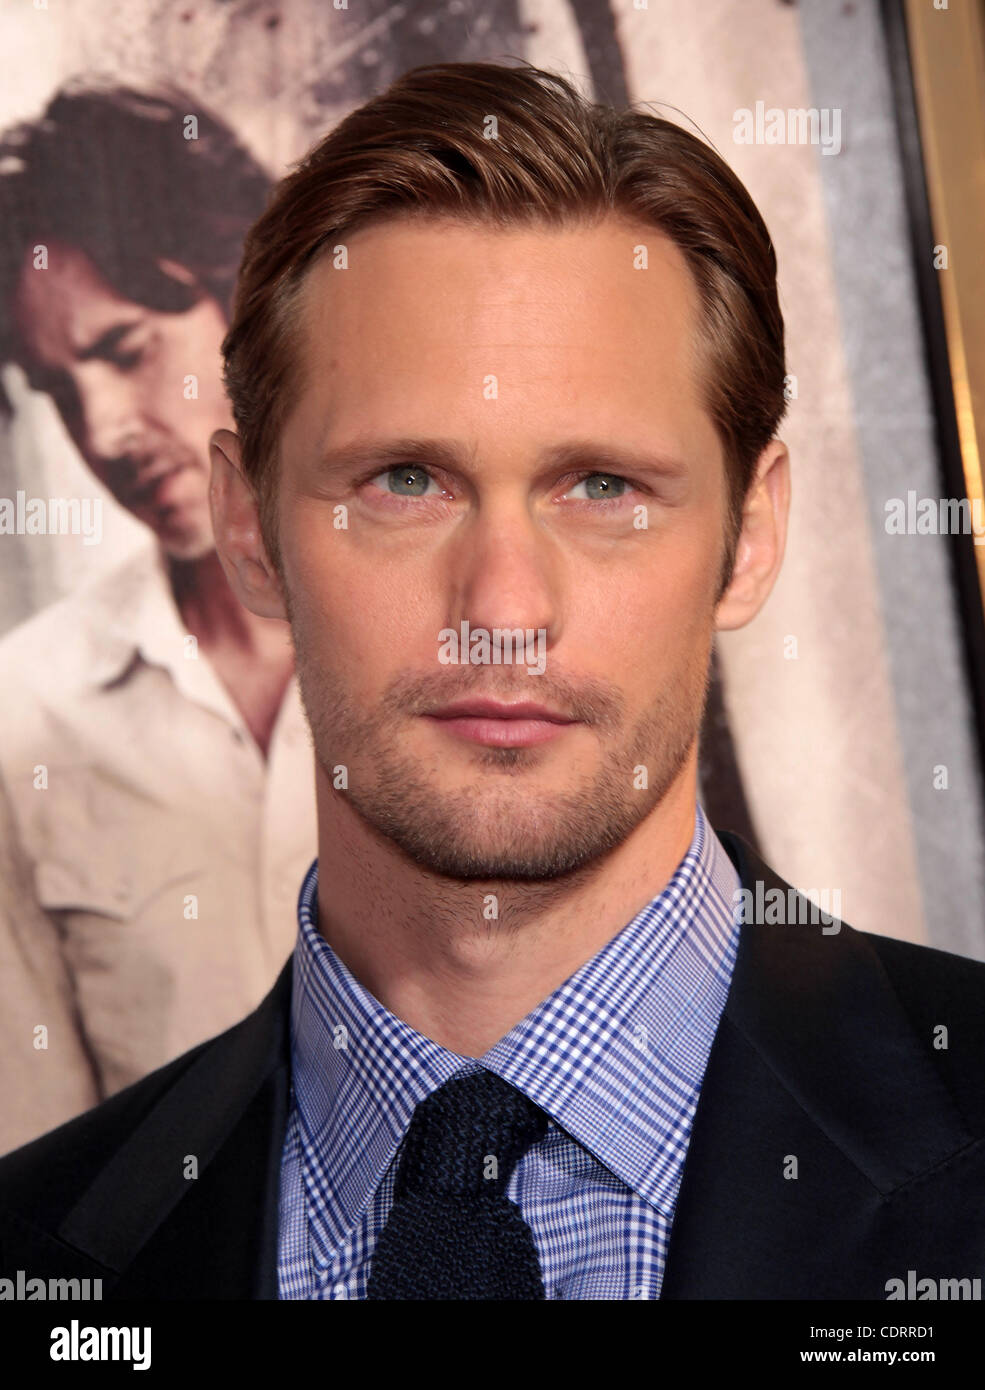 June 21, 2011 - Hollywood, California, U.S. - ALEXANDER SKARSGARD arrives for the premiere of the  'True Blood' at the Cinerama theater. (Credit Image: © Lisa O'Connor/ZUMAPRESS.com) Stock Photo